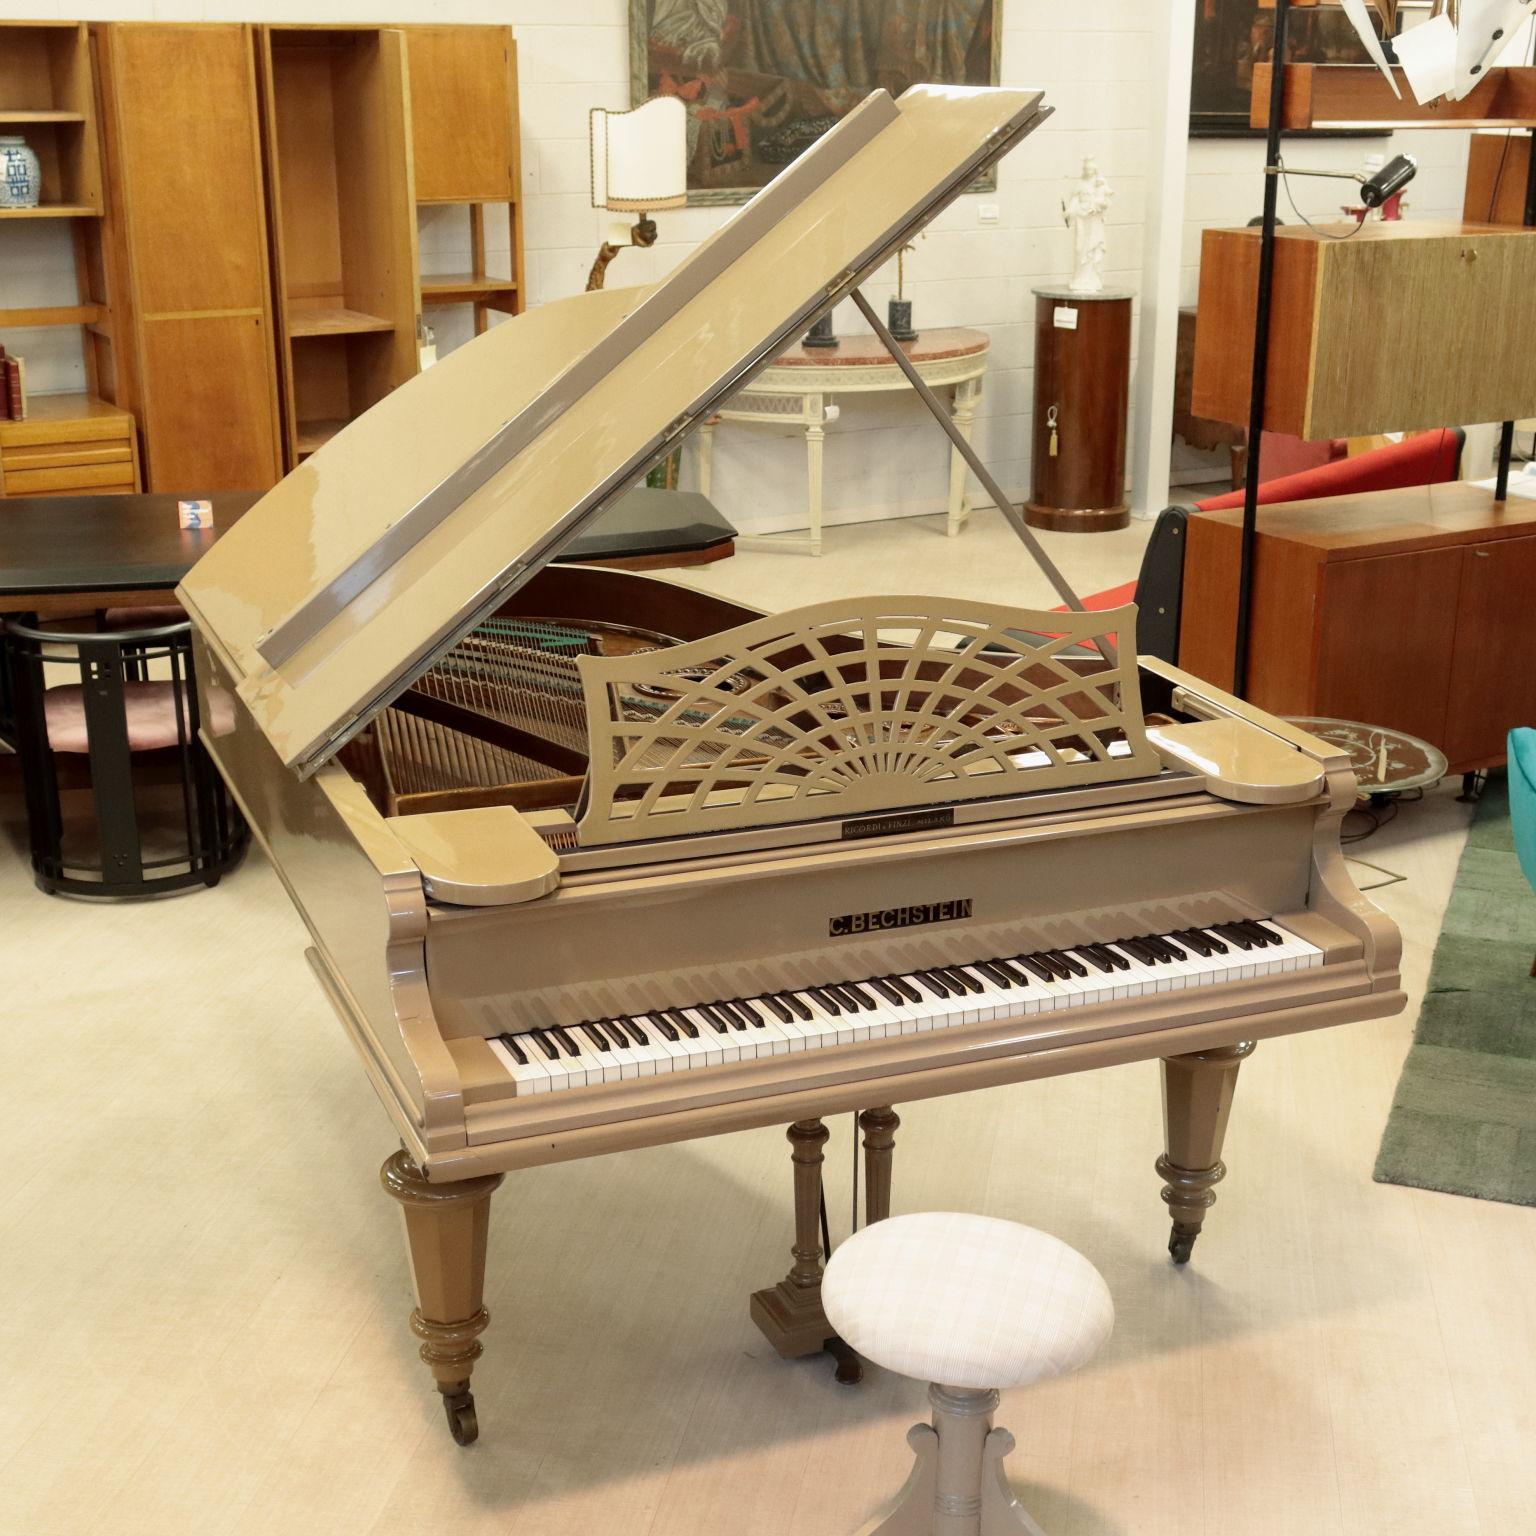 Baby grand piano from 1907.
Bechstein is a German company taht builds and sells grand and upright pianos. The first factory was founded in Berlin, Johannisstrasse 5, in 1853 by Carl Bechstein., supplier of the court of the Prussian king Friedrich